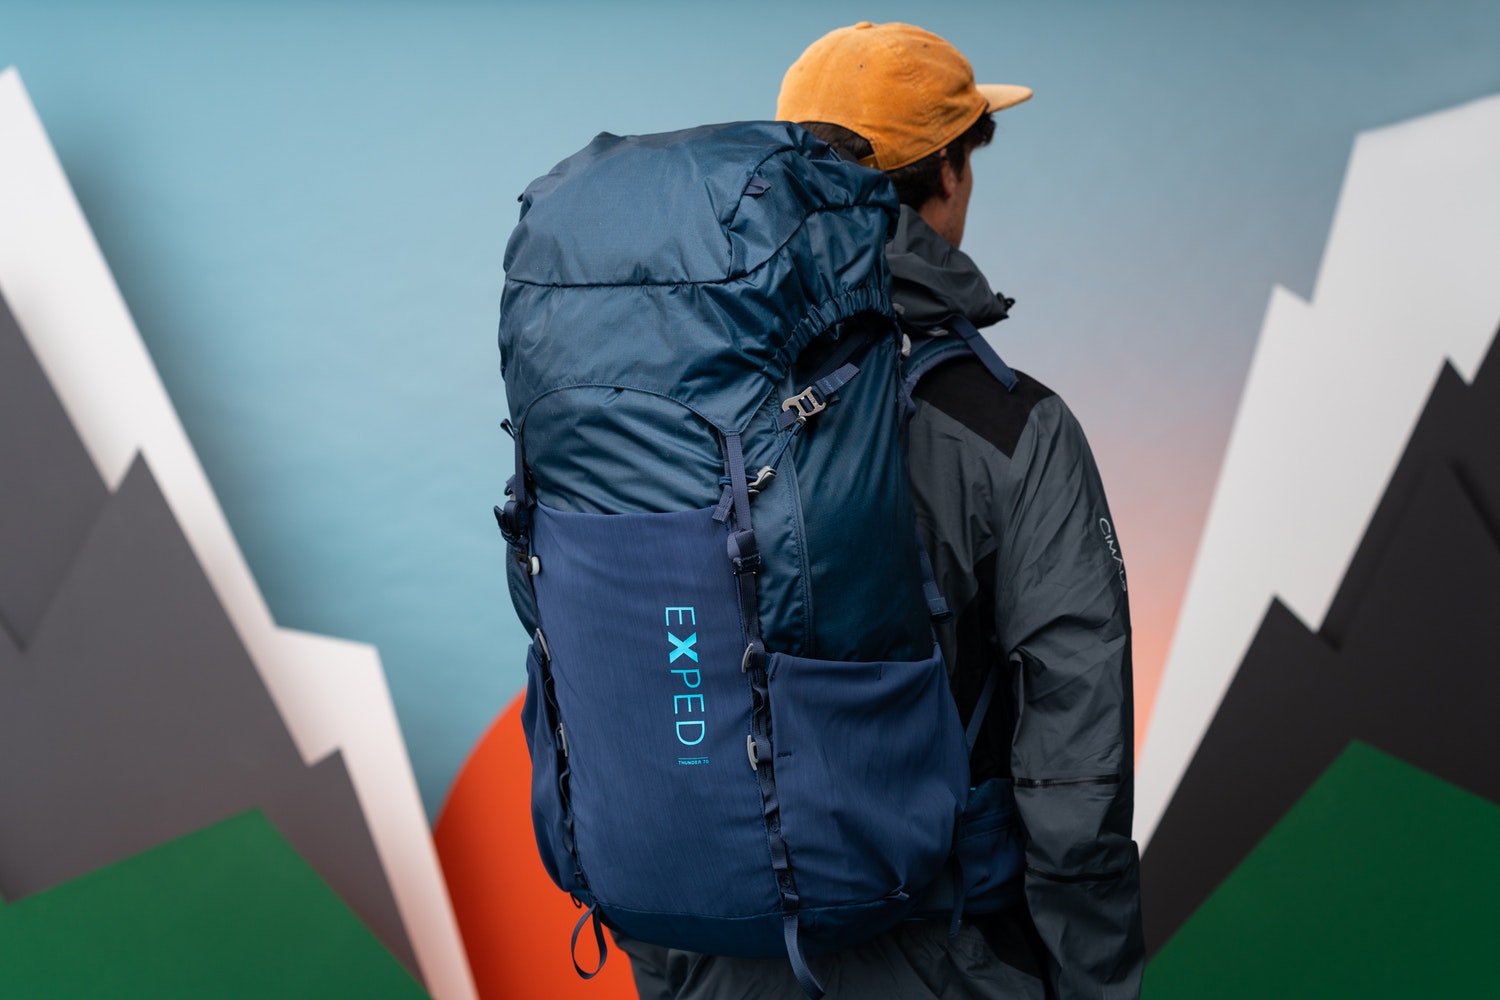 Backpacking Backpacks | Buyer’s Guide For Multi-Day Trekking Packs: Expedition